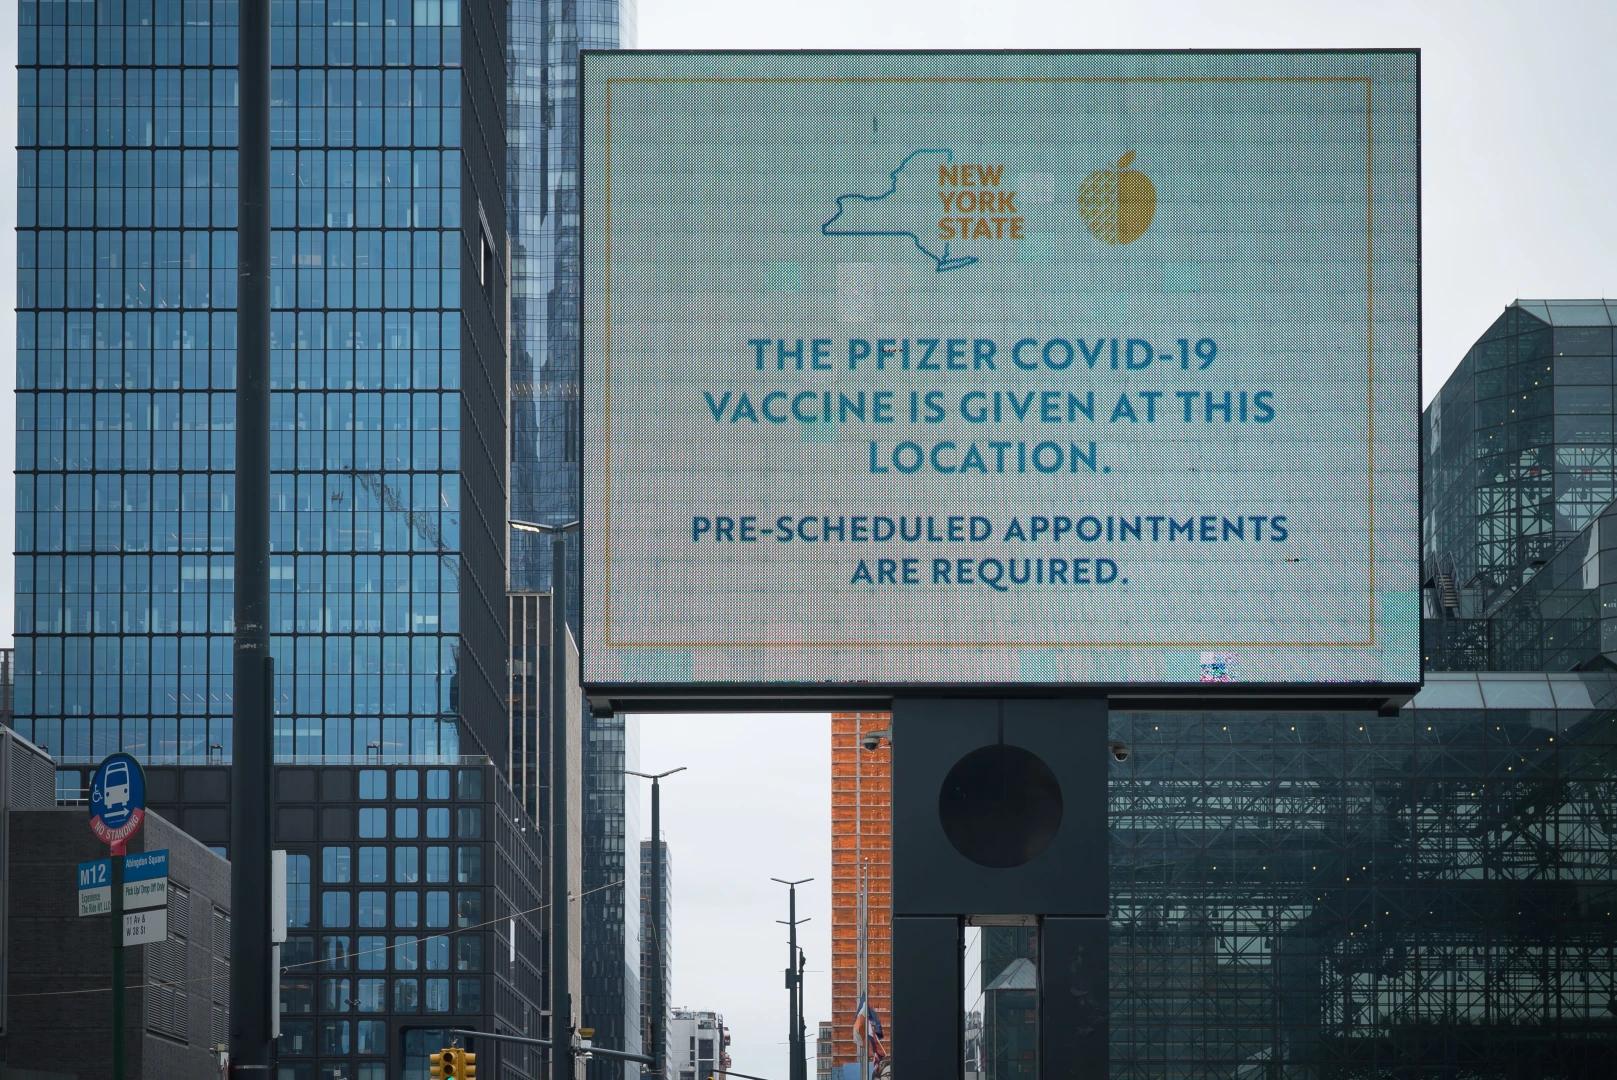 Pfizer's COVID-19 vaccine - Here's what Ben Shapiro could have known